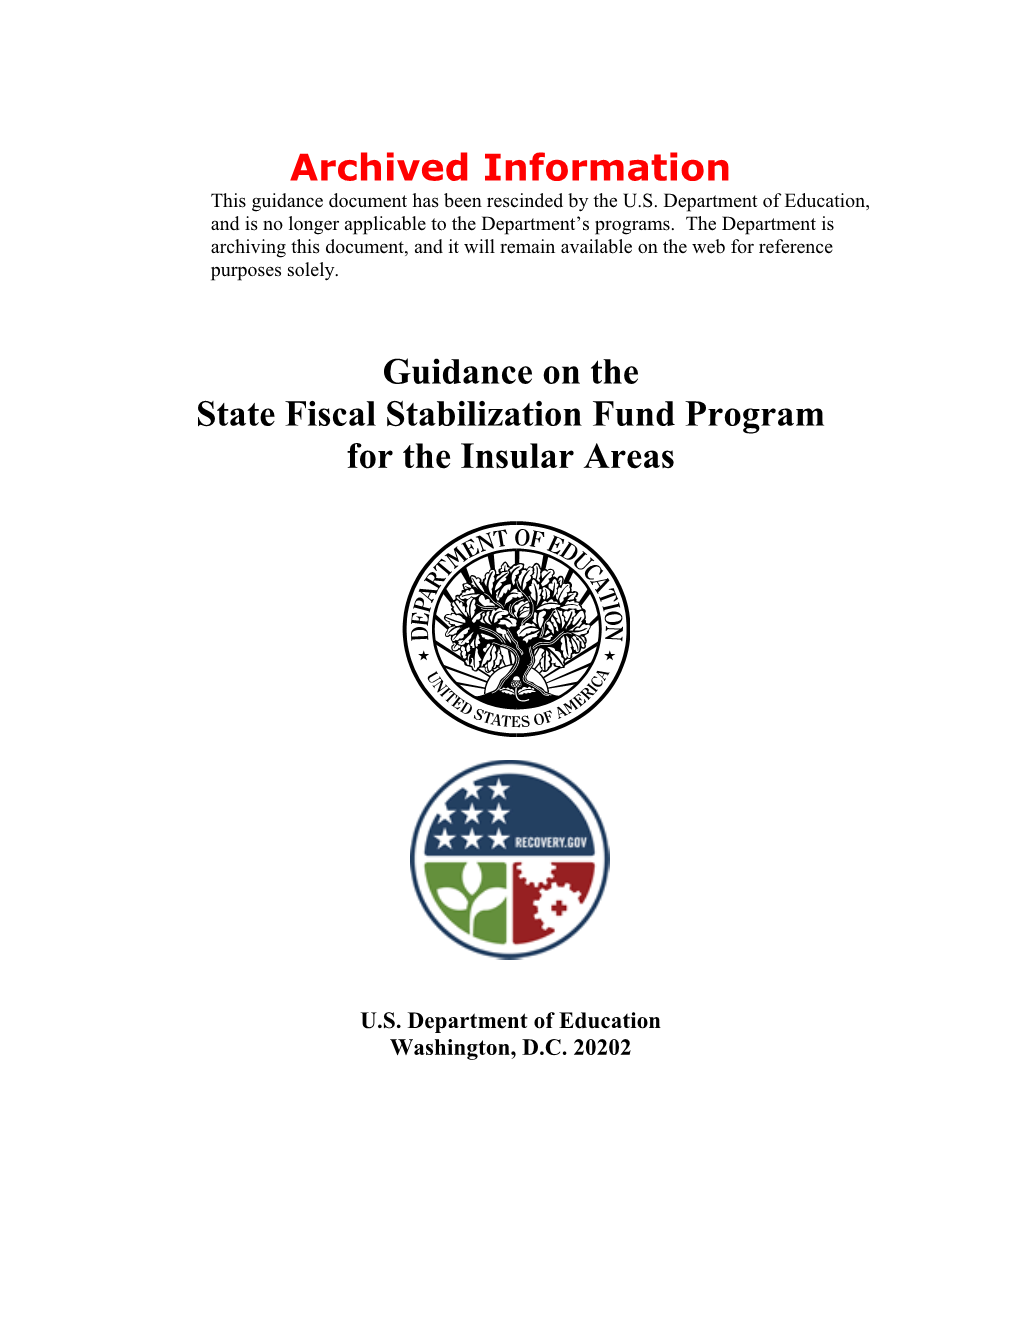 Archived: Guidance on the State Fiscal Stabilization Fund Program for the Insular Areas